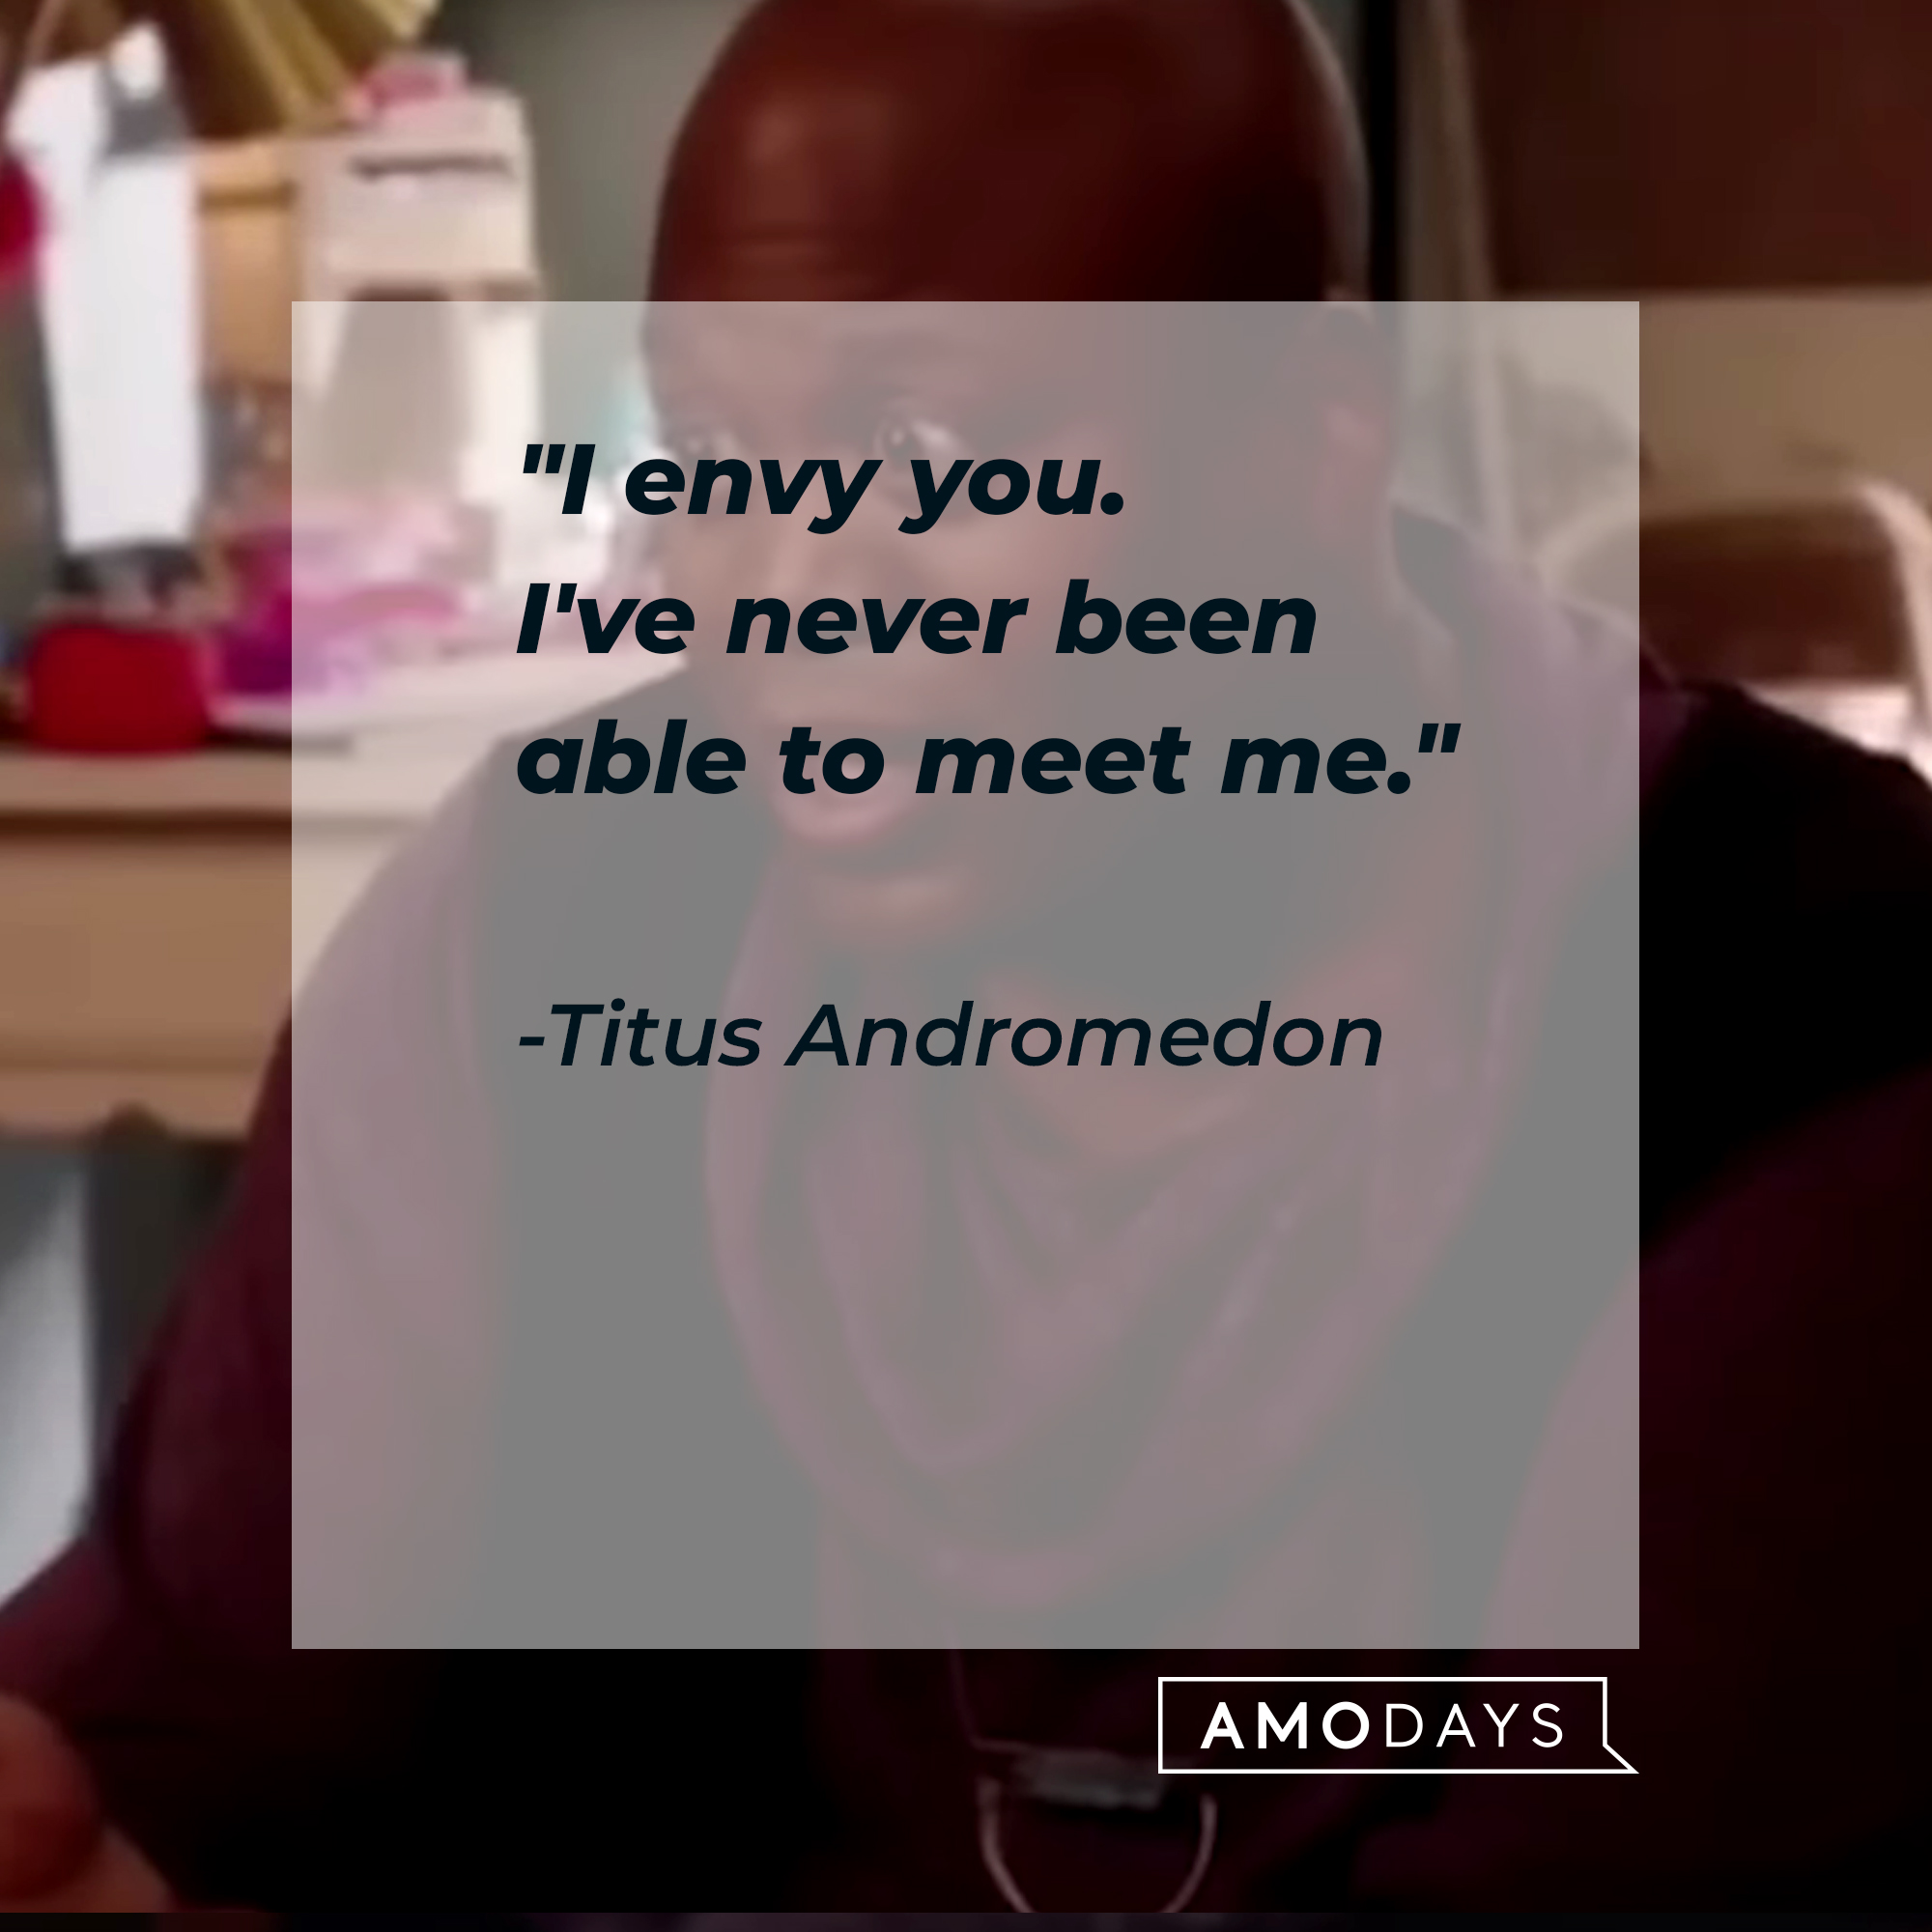 A photo of Titus Andromedon with the quote, "I envy you. I've never been able to meet me." | Source: YouTube/Netflix